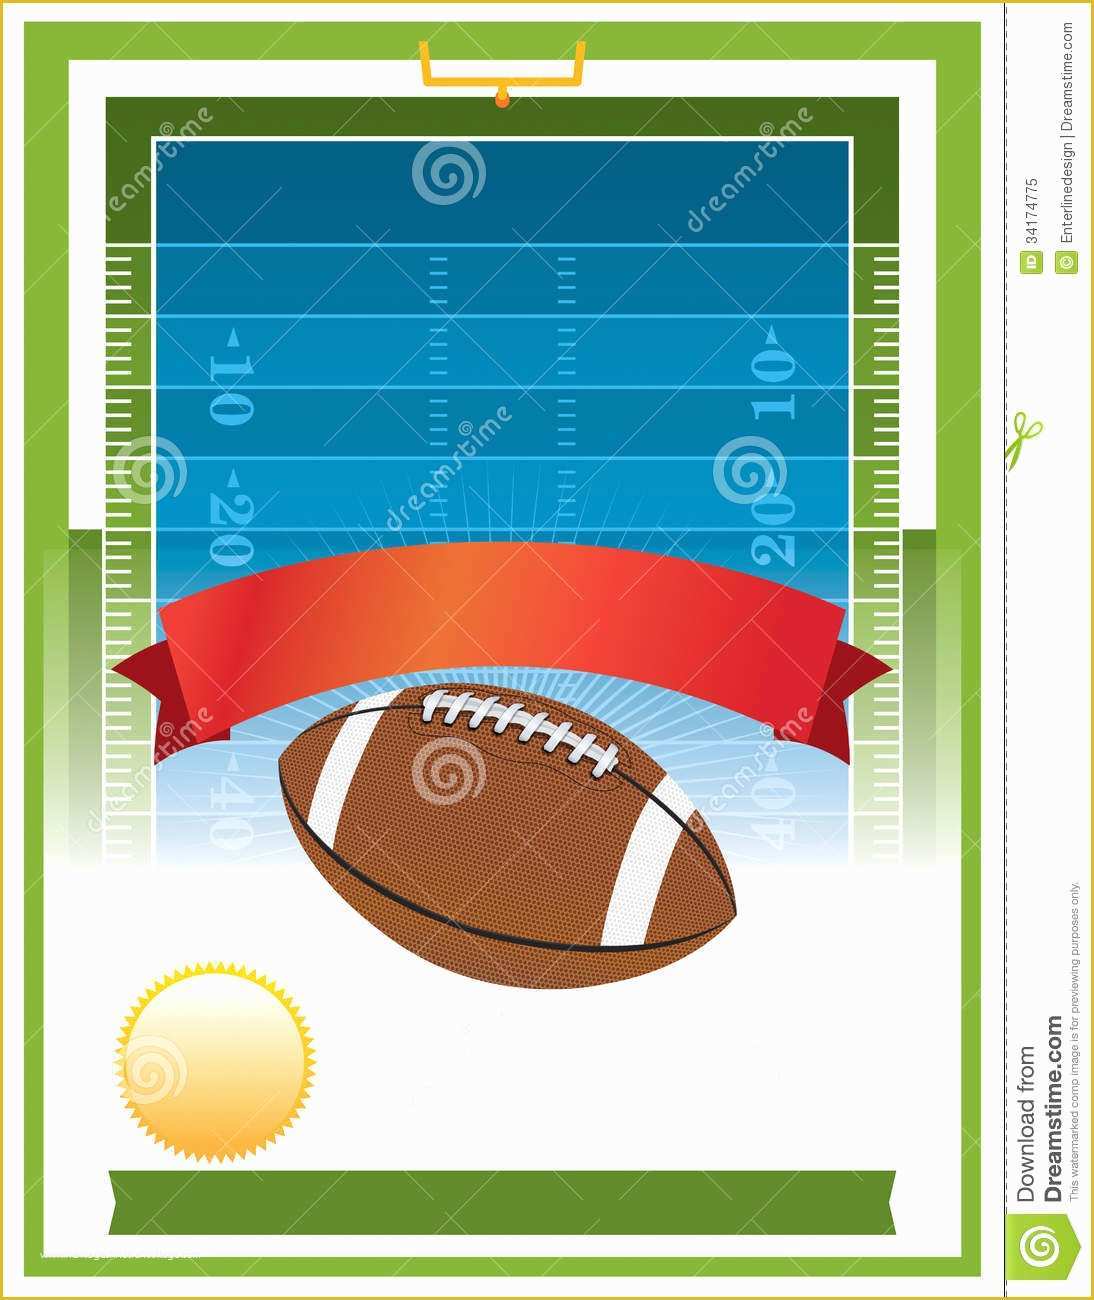 Free Football Flyer Design Templates Of American Football Tailgate Party Flyer Design Stock Vector